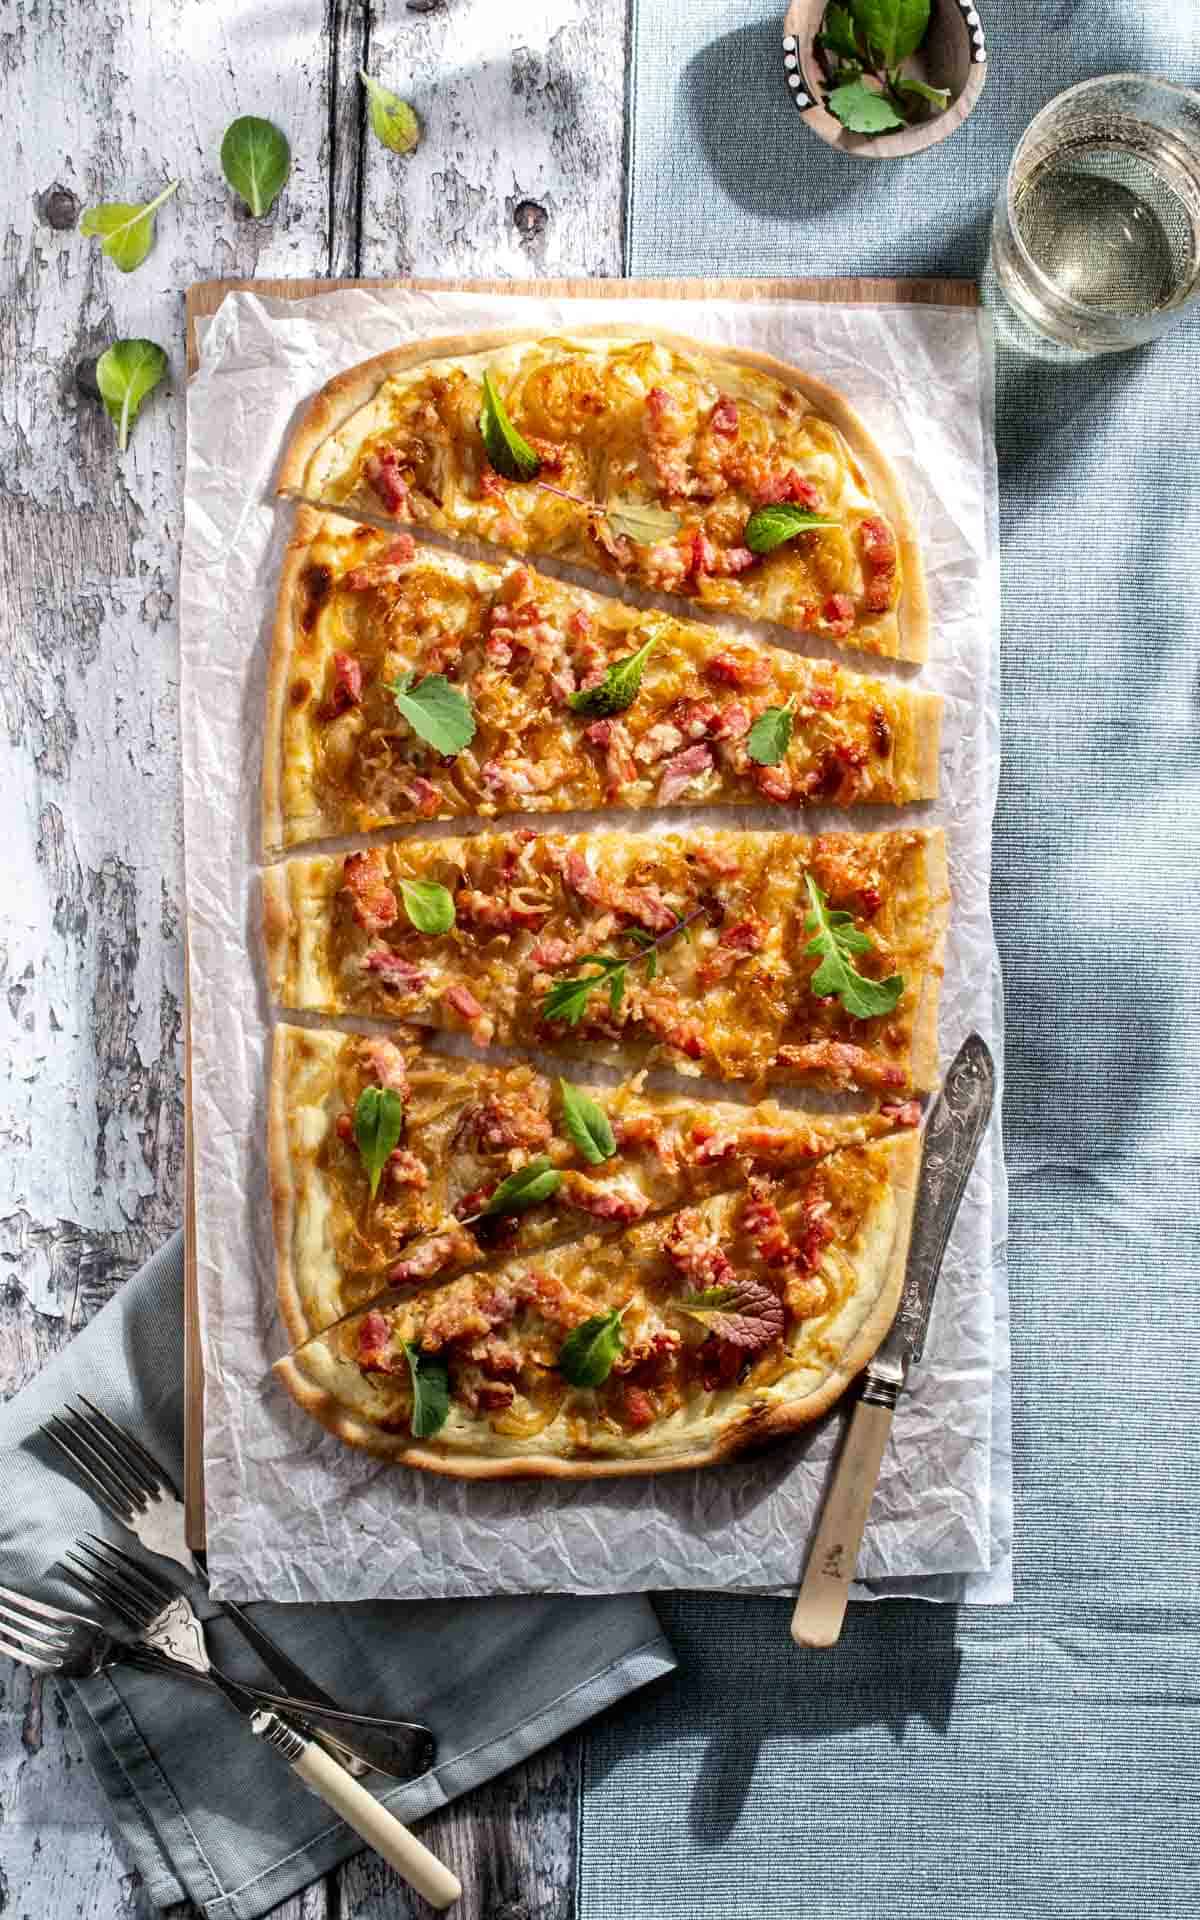 Flammkuchen on a wooden table, sliced into slices.